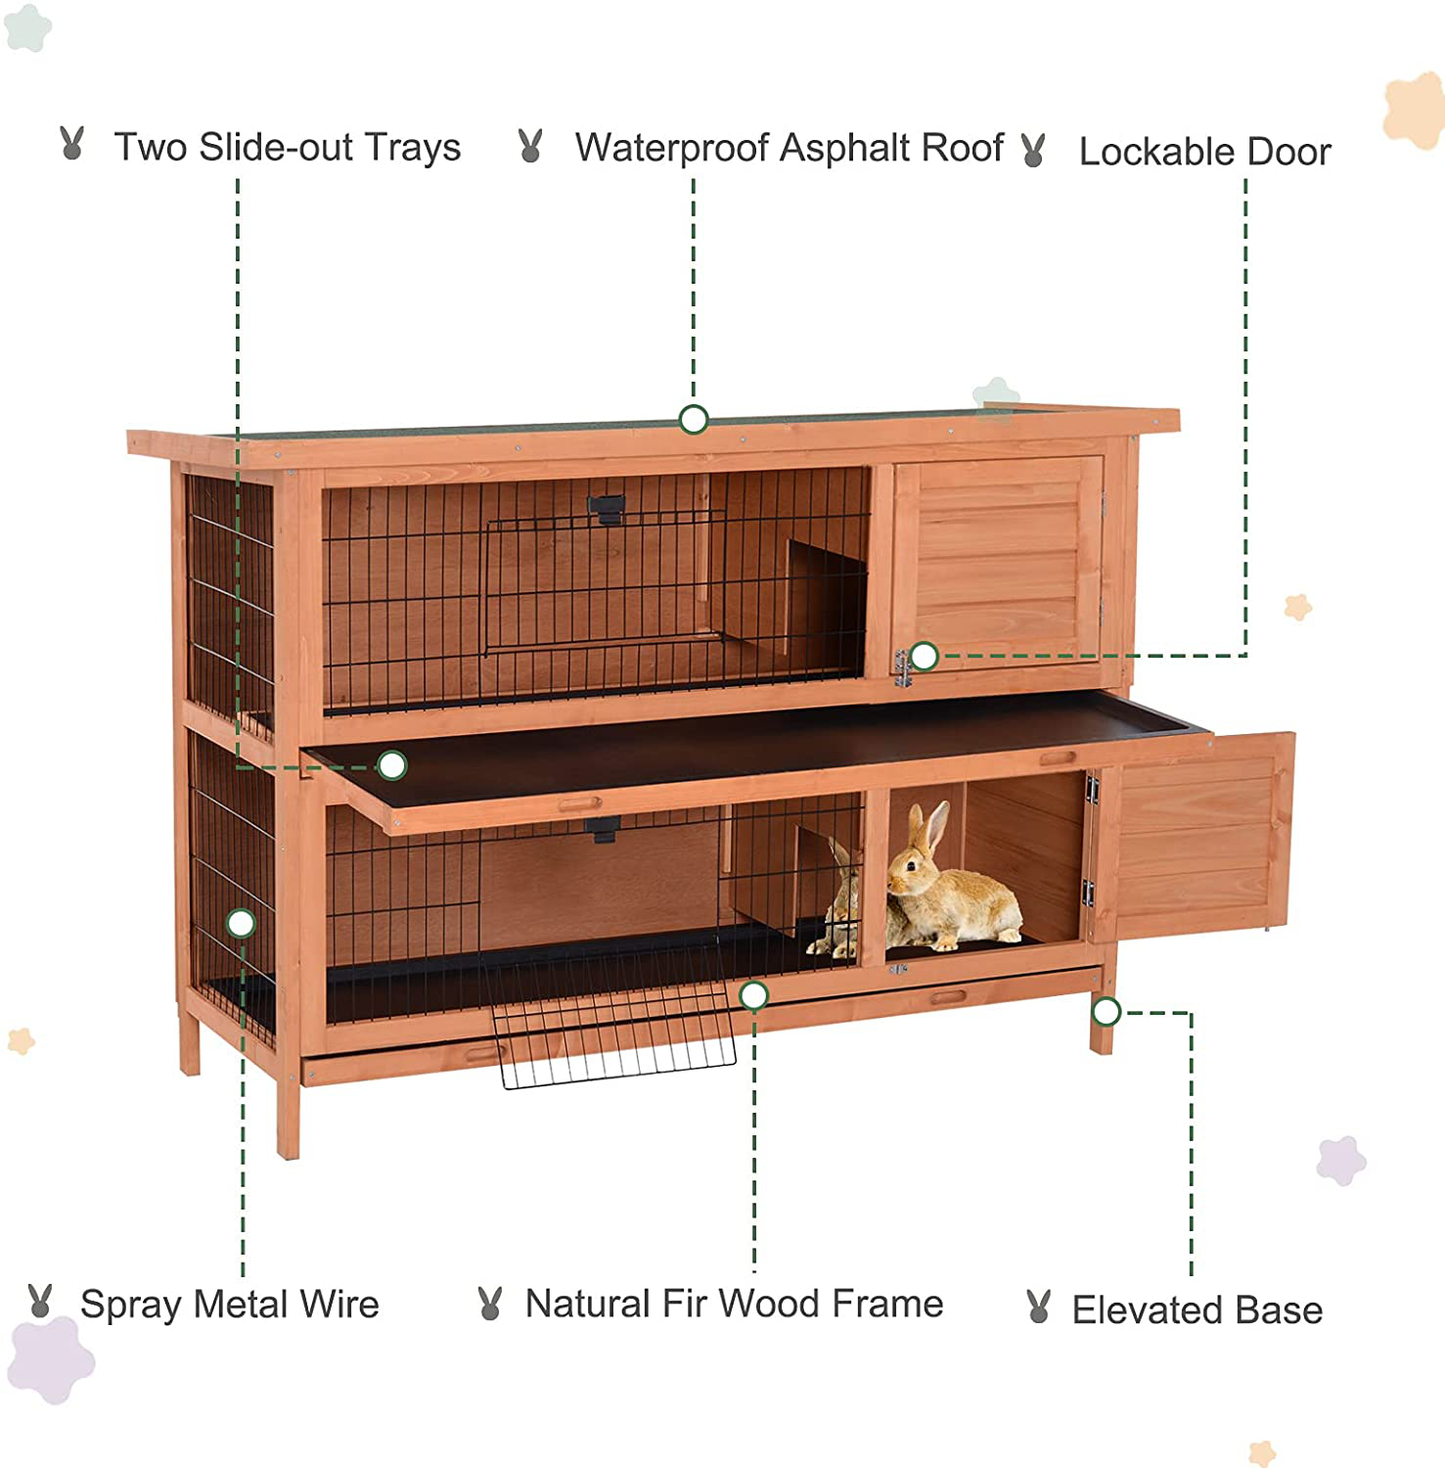 Pawhut 54" 2-Floor Large Rabbit Hutch Wooden Pet House Bunny Cage Small Animal Habitat with Lockable Doors Run Asphalt Roof for Outdoor Use